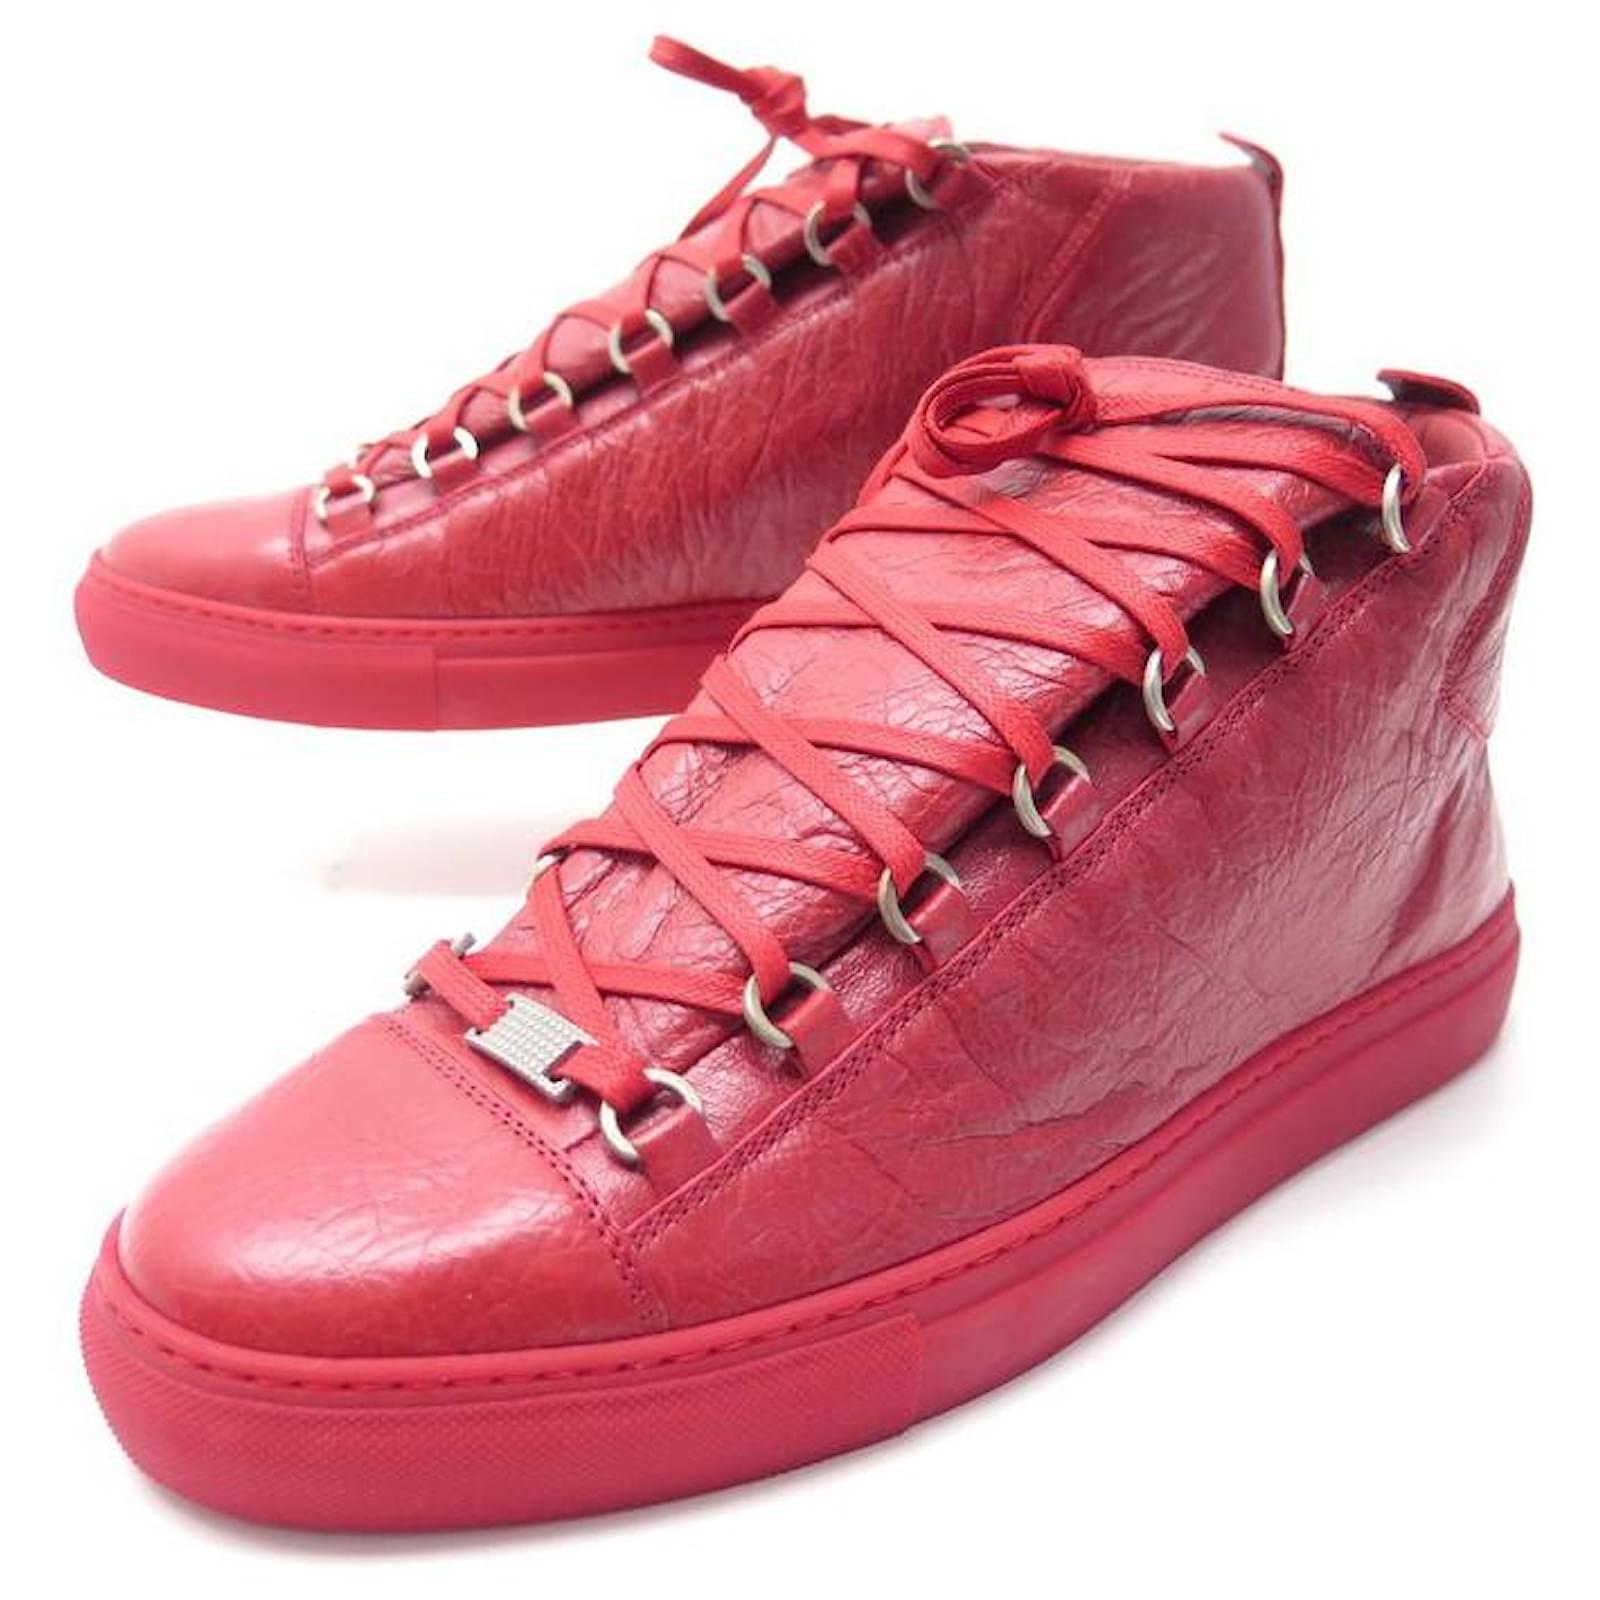 BALENCIAGA BASKETS ARENA SHOES 43 Red leather 412381 NEW SNEAKERS - Joli Closet